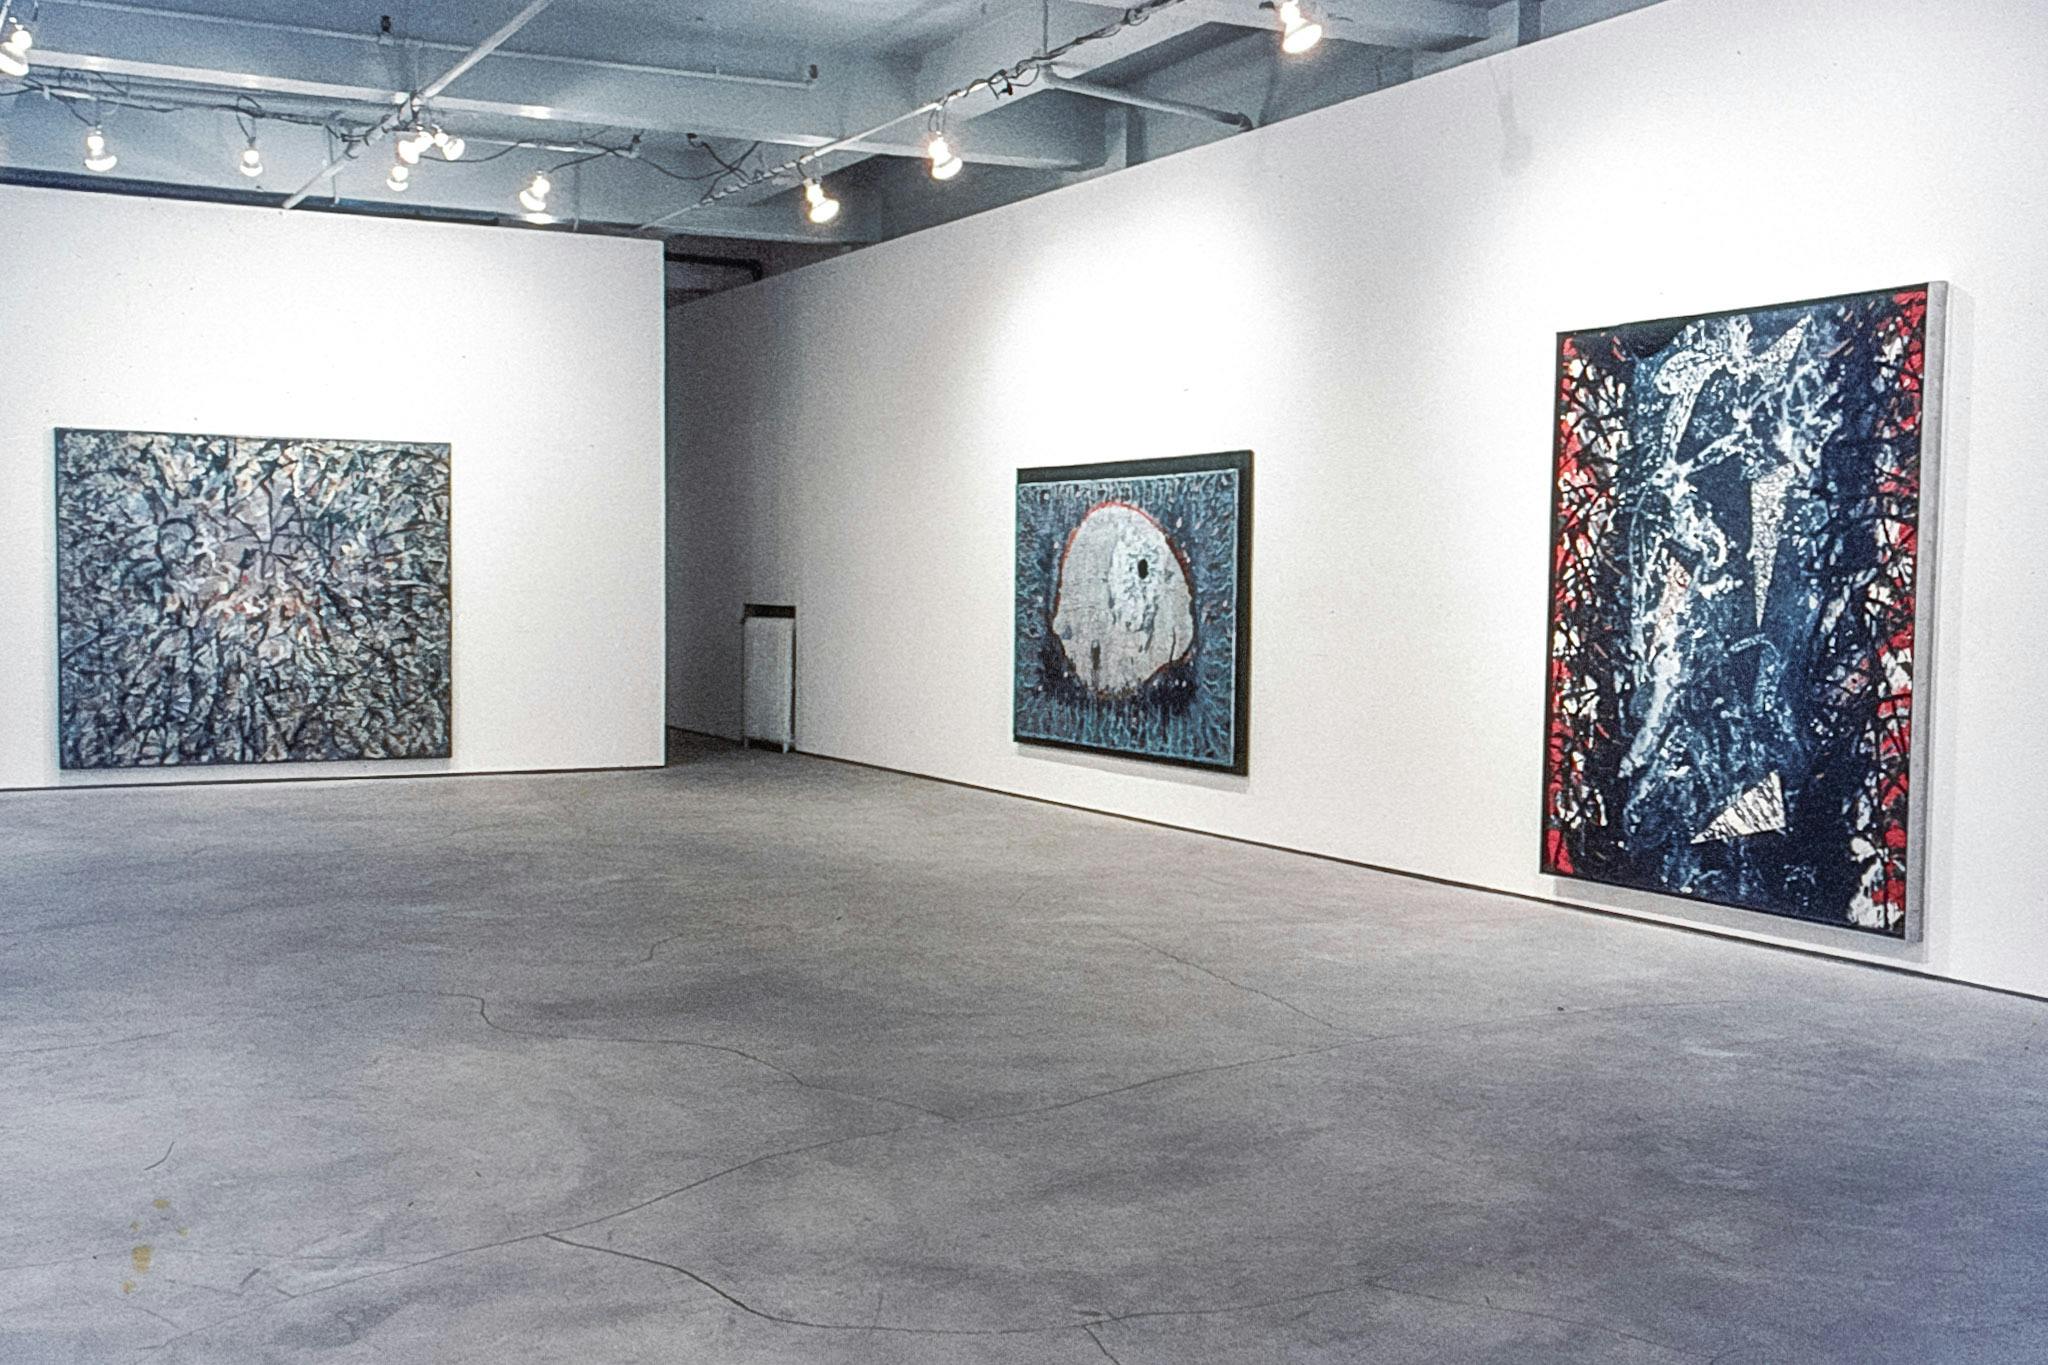 3 paintings in a gallery. The paintings are all big but vary slightly in shape. They show different forms created through layers of paint and materials, primarily using red, black, white, and blue.